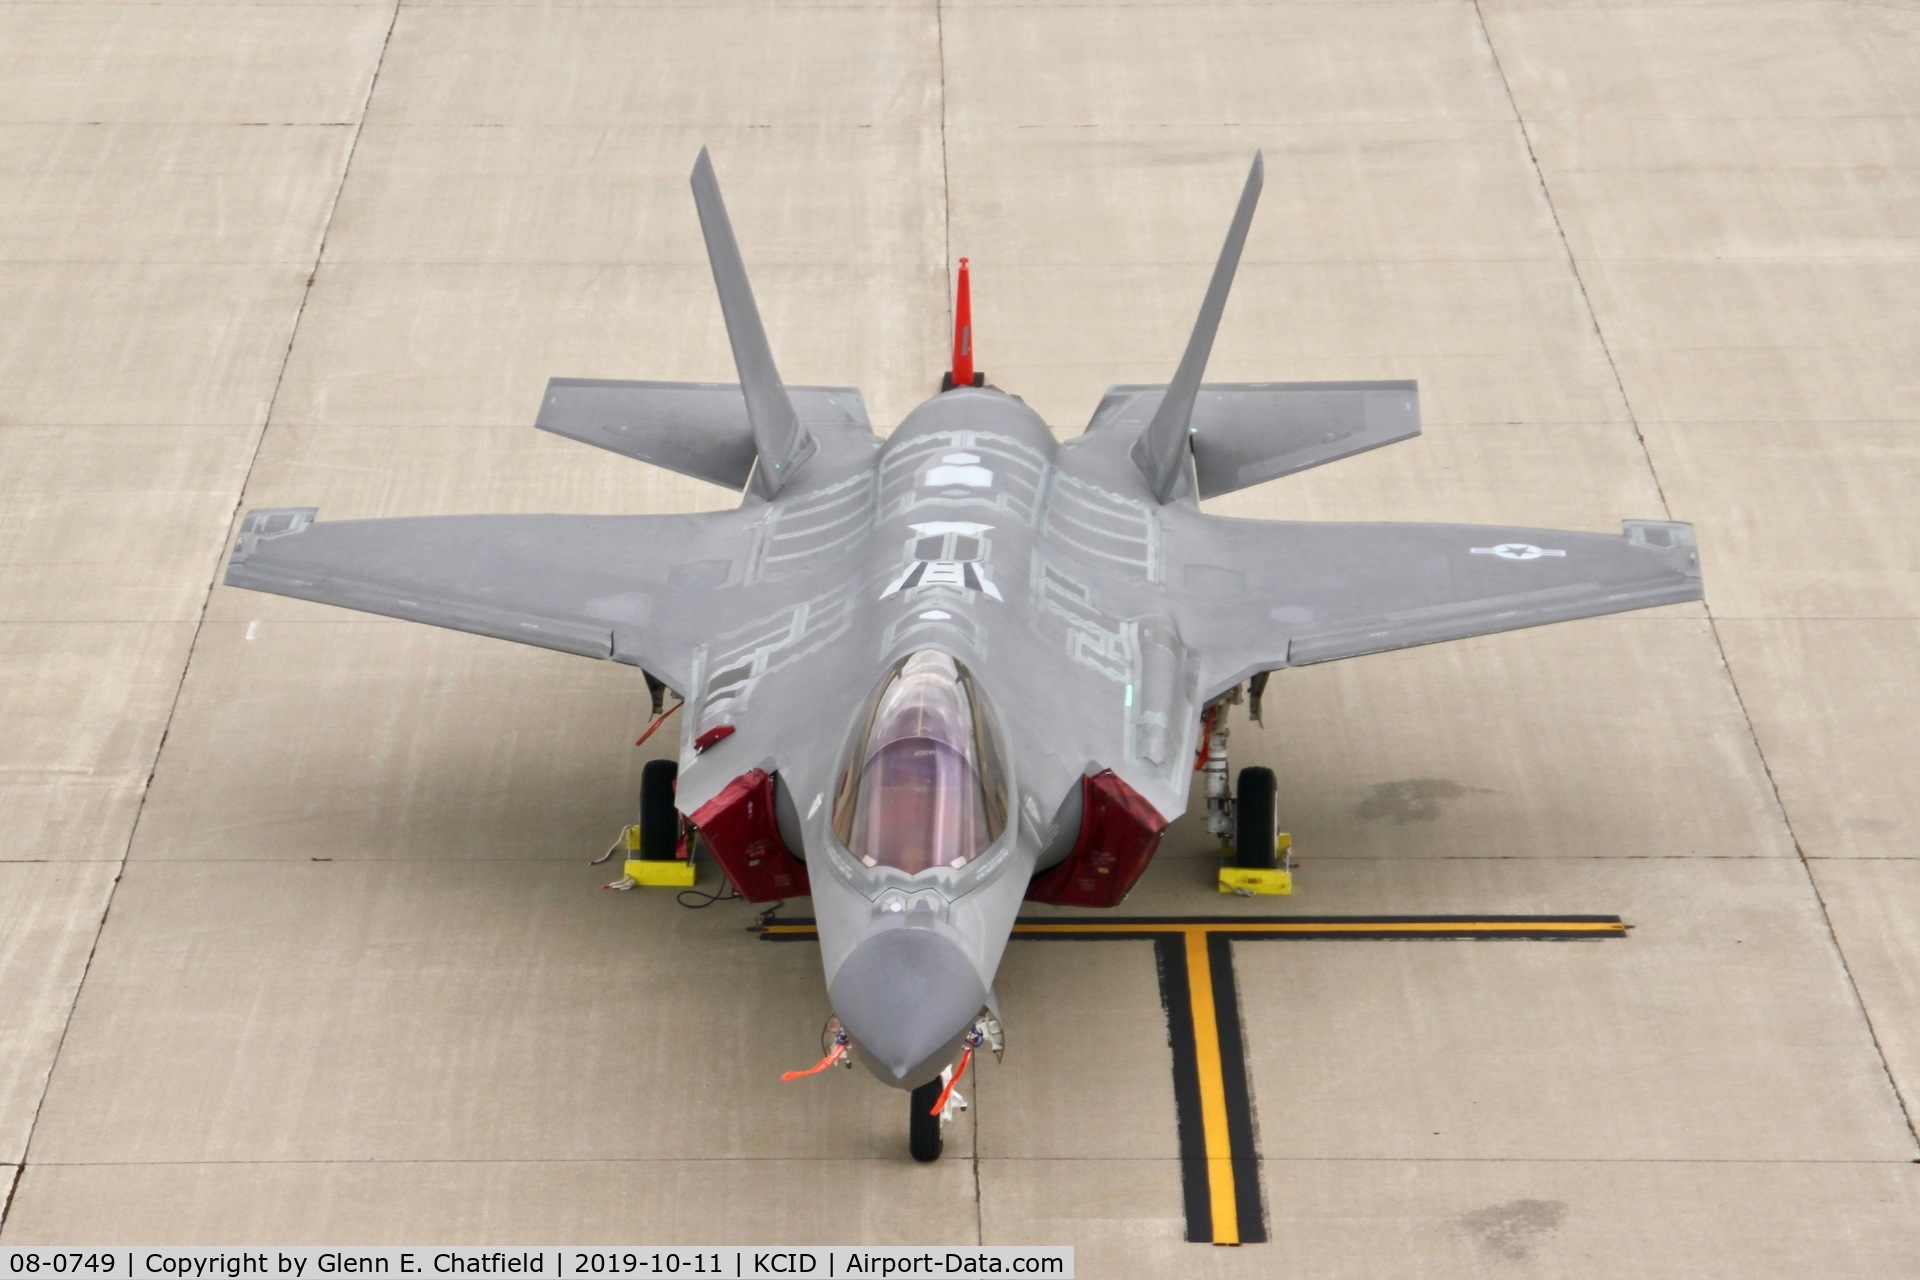 08-0749, 2011 Lockheed Martin F-35A Lightning II C/N AF-11, Photographed from the control tower